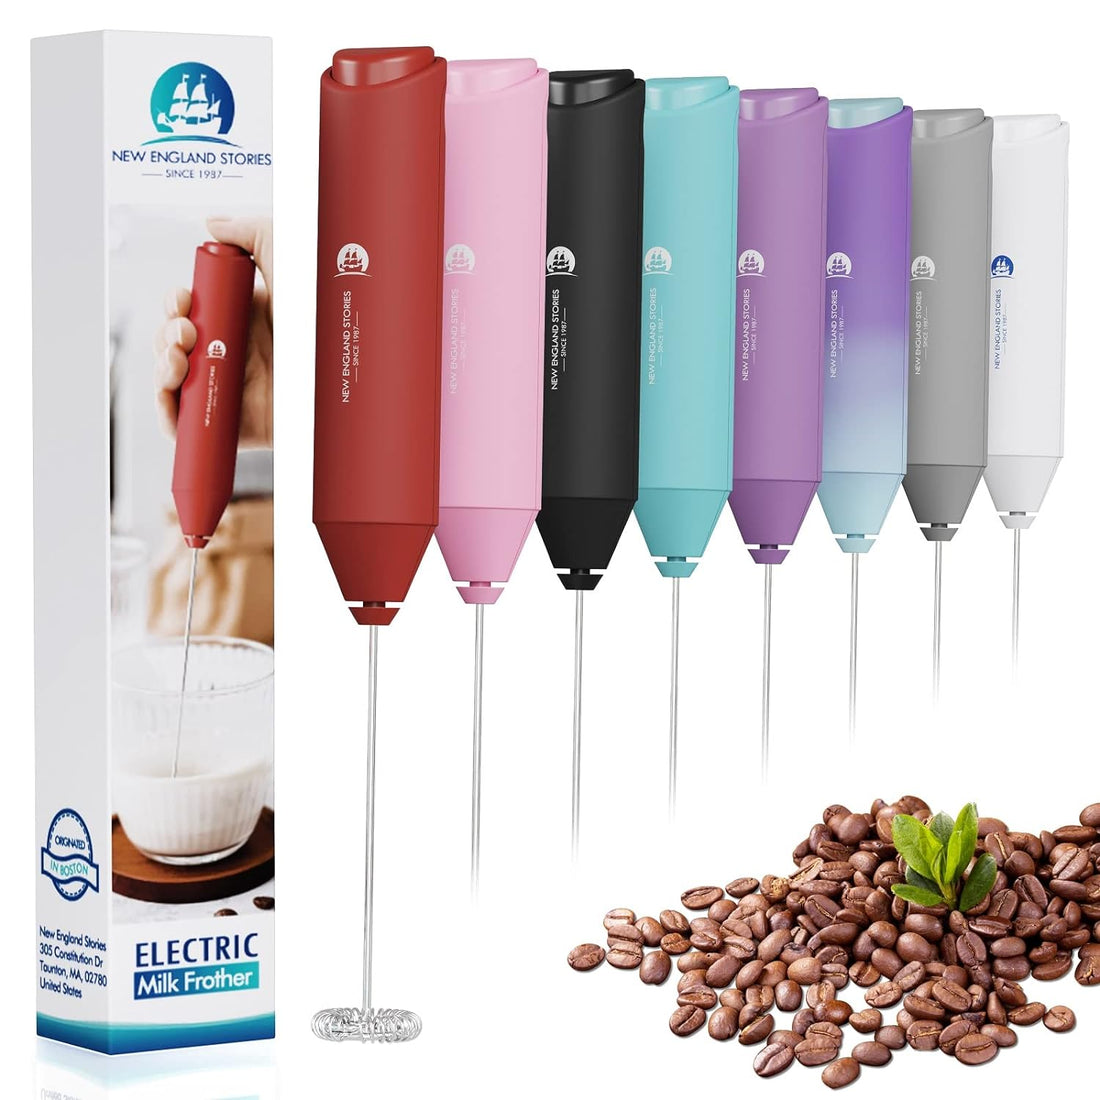 Electric Milk Frother Handheld, Battery Operated Whisk Beater Foam Maker for Coffee, Cappuccino, Latte, Matcha, Hot Chocolate, Mini Drink Mixer - Red